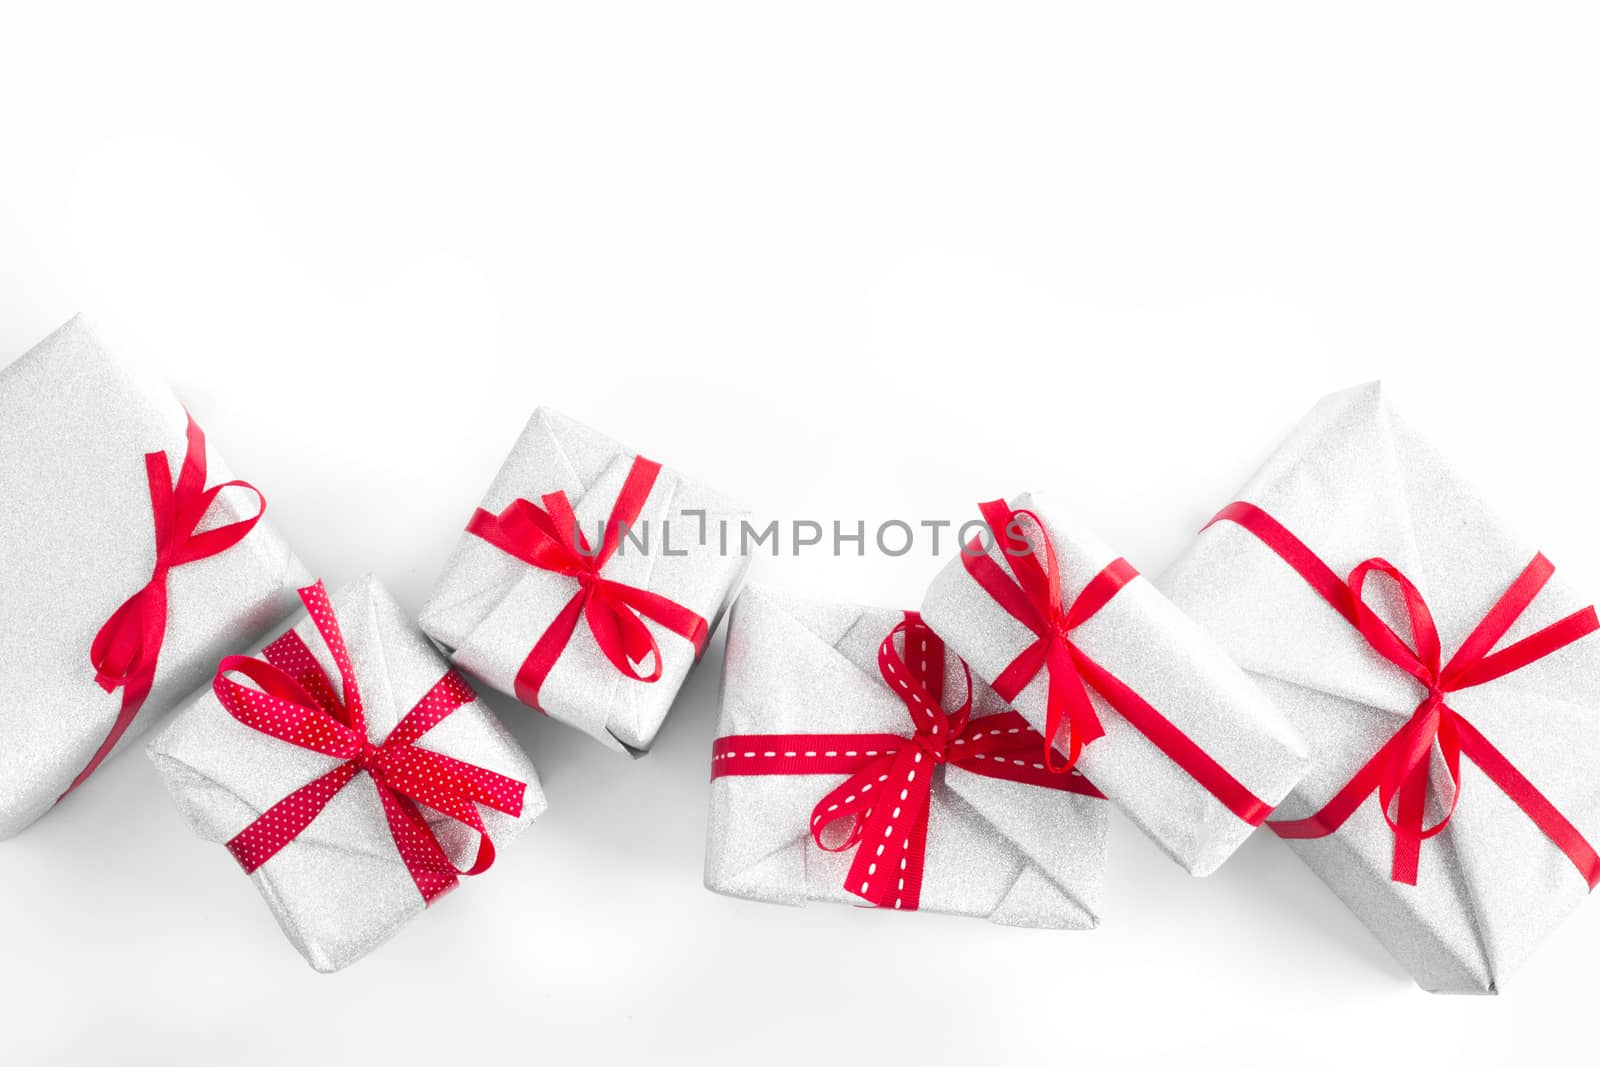 Border frame design element background of silver glitter gifts with red ribbon bow decoration isolated on white background top view flat lay composition with copy space for text